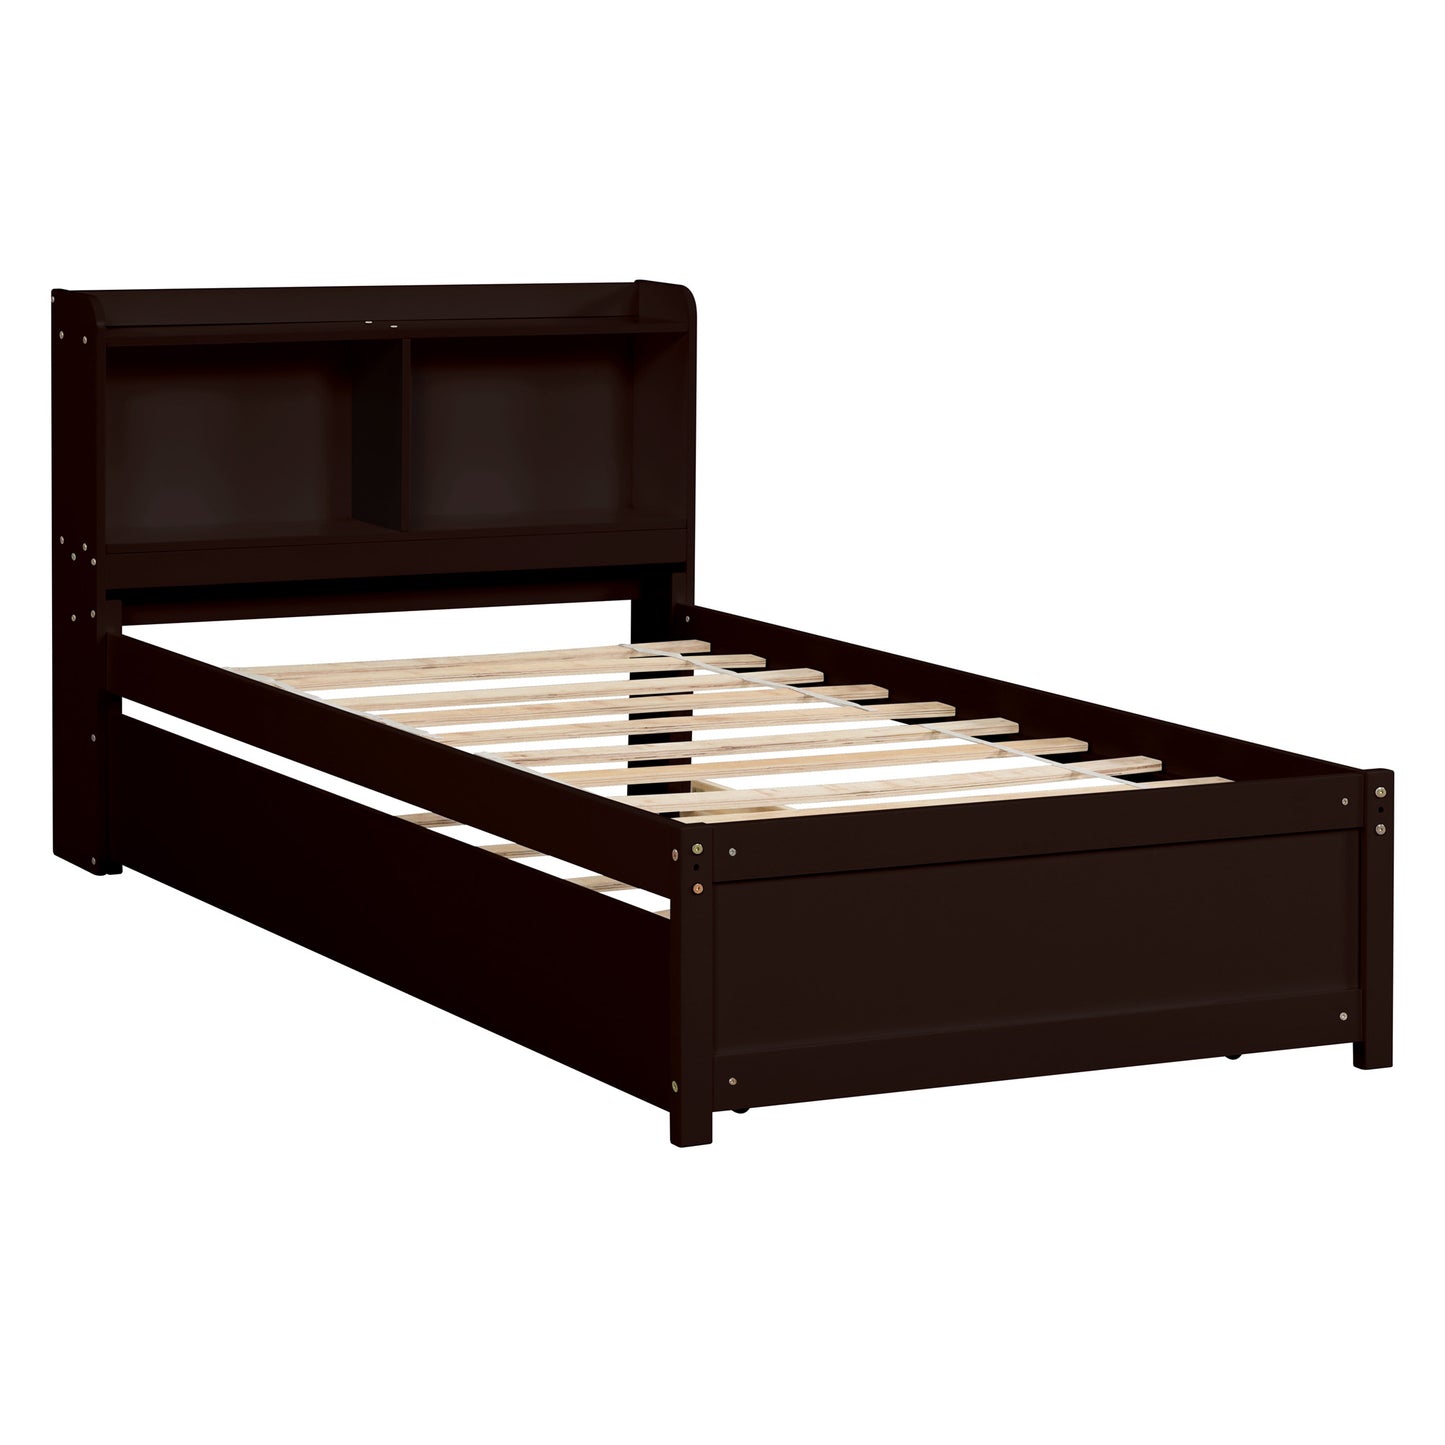 Twin Bed Frame with Trundle Included, Solid Pine Wood Platform Bed Frame with Storage Headboard for Kids Teens Adults, Espresso